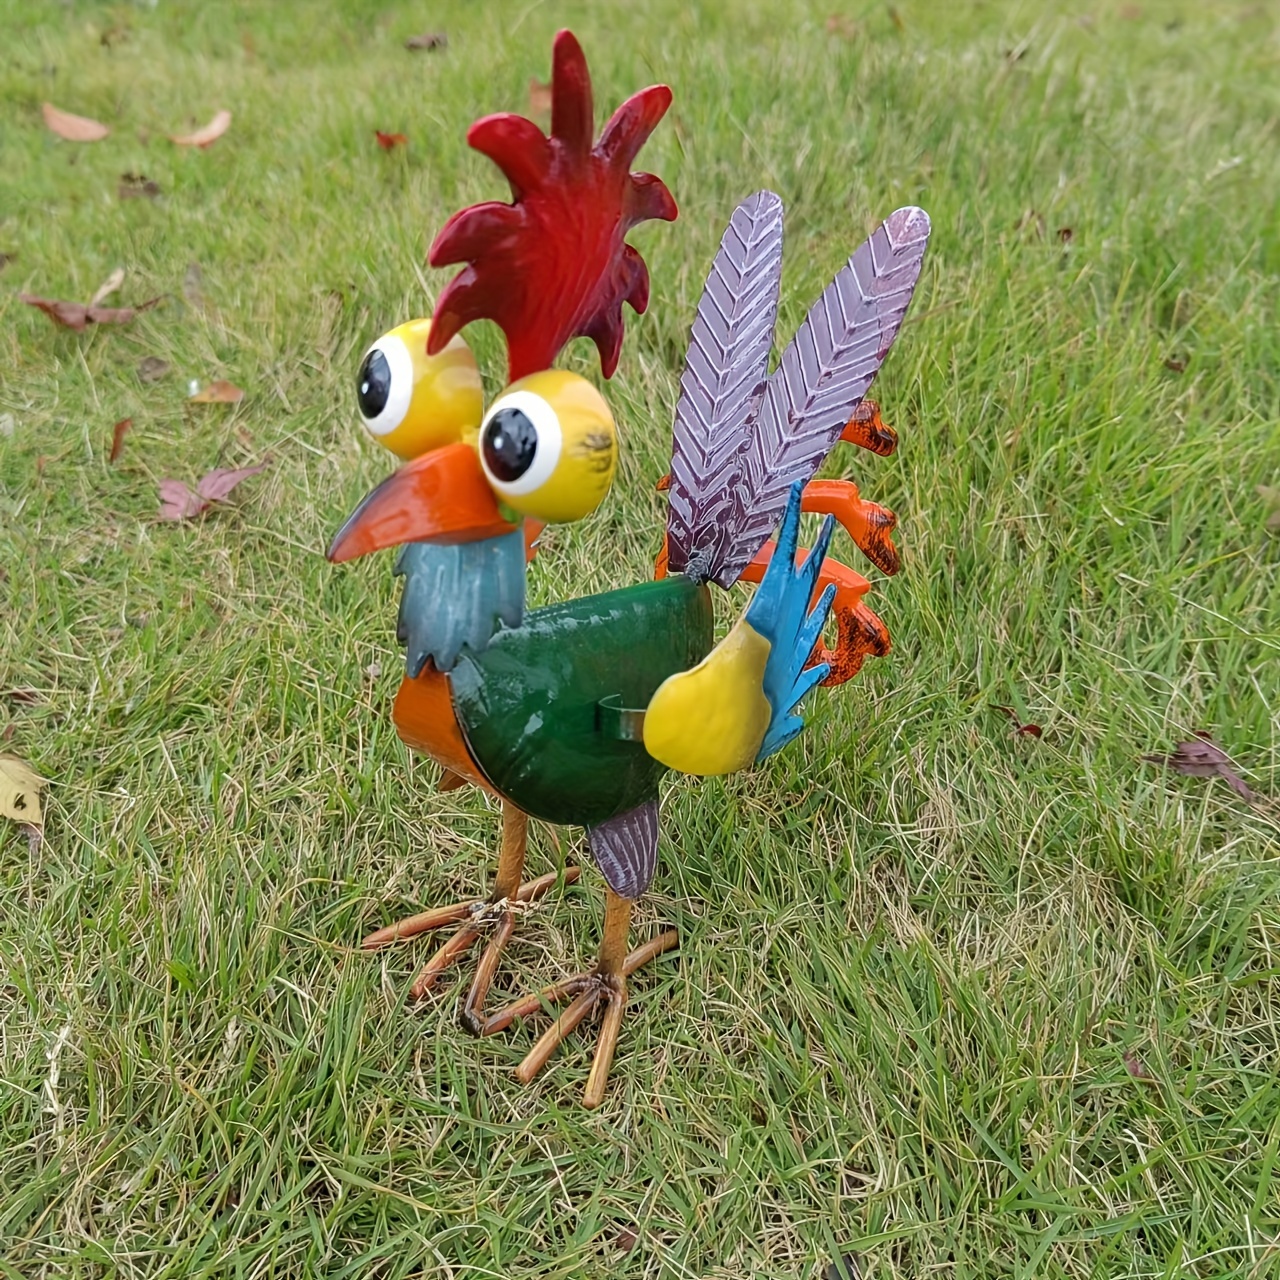 

1pc Colorful Metal Rooster Statue, Rustic Iron Garden Cock Sculpture, Outdoor Decorative Figurine, Farmhouse Style Thanksgiving Decor, 6.3x8.26 Inches